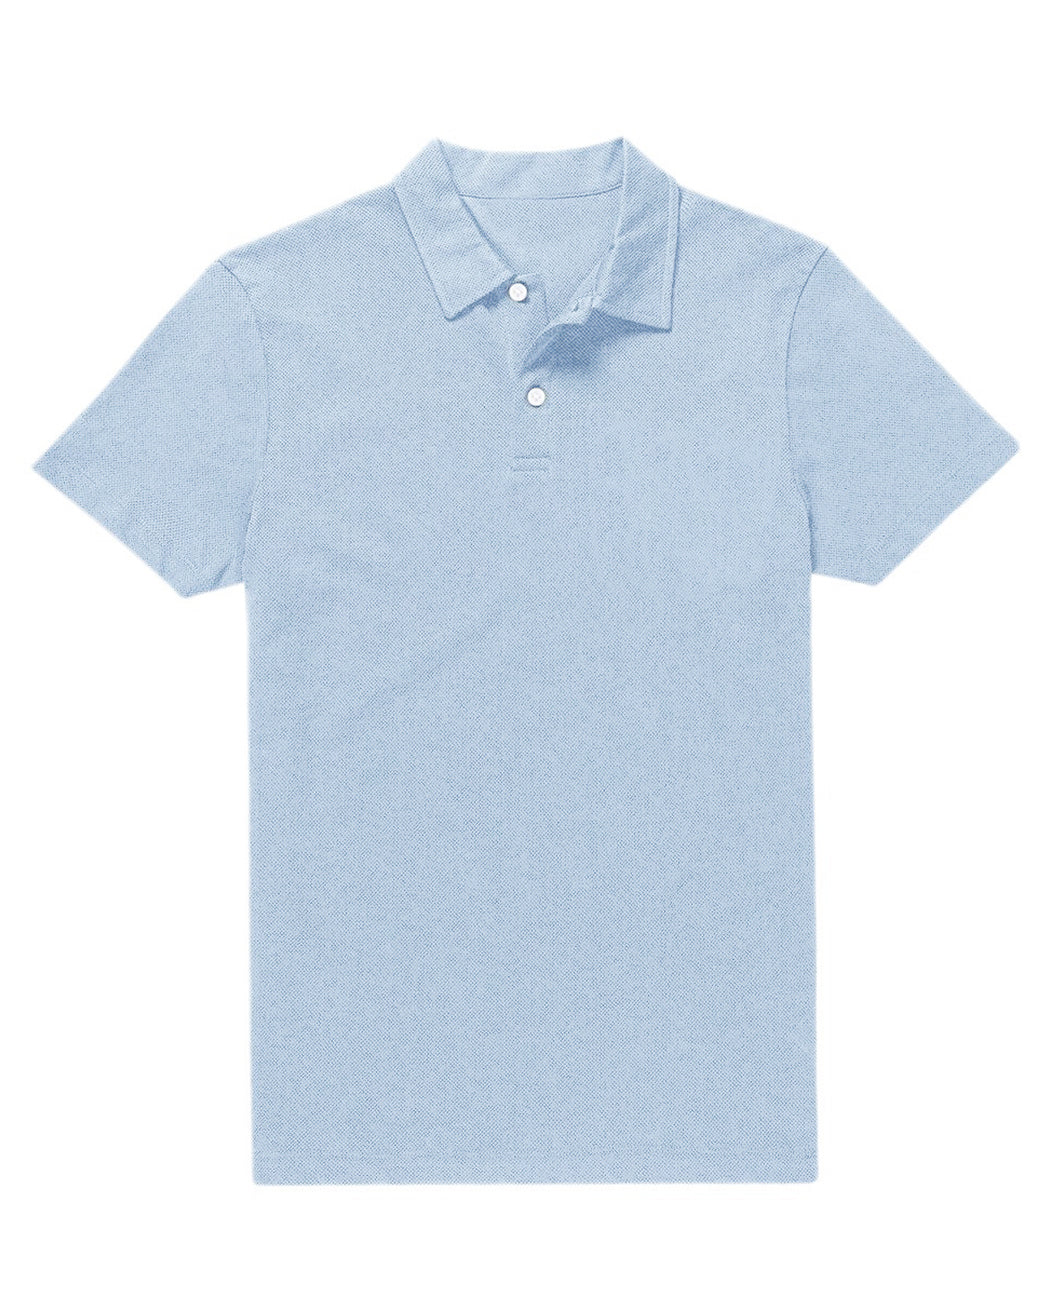 Front of the custom oxford polo shirt for men by Luxire in light blue with dots